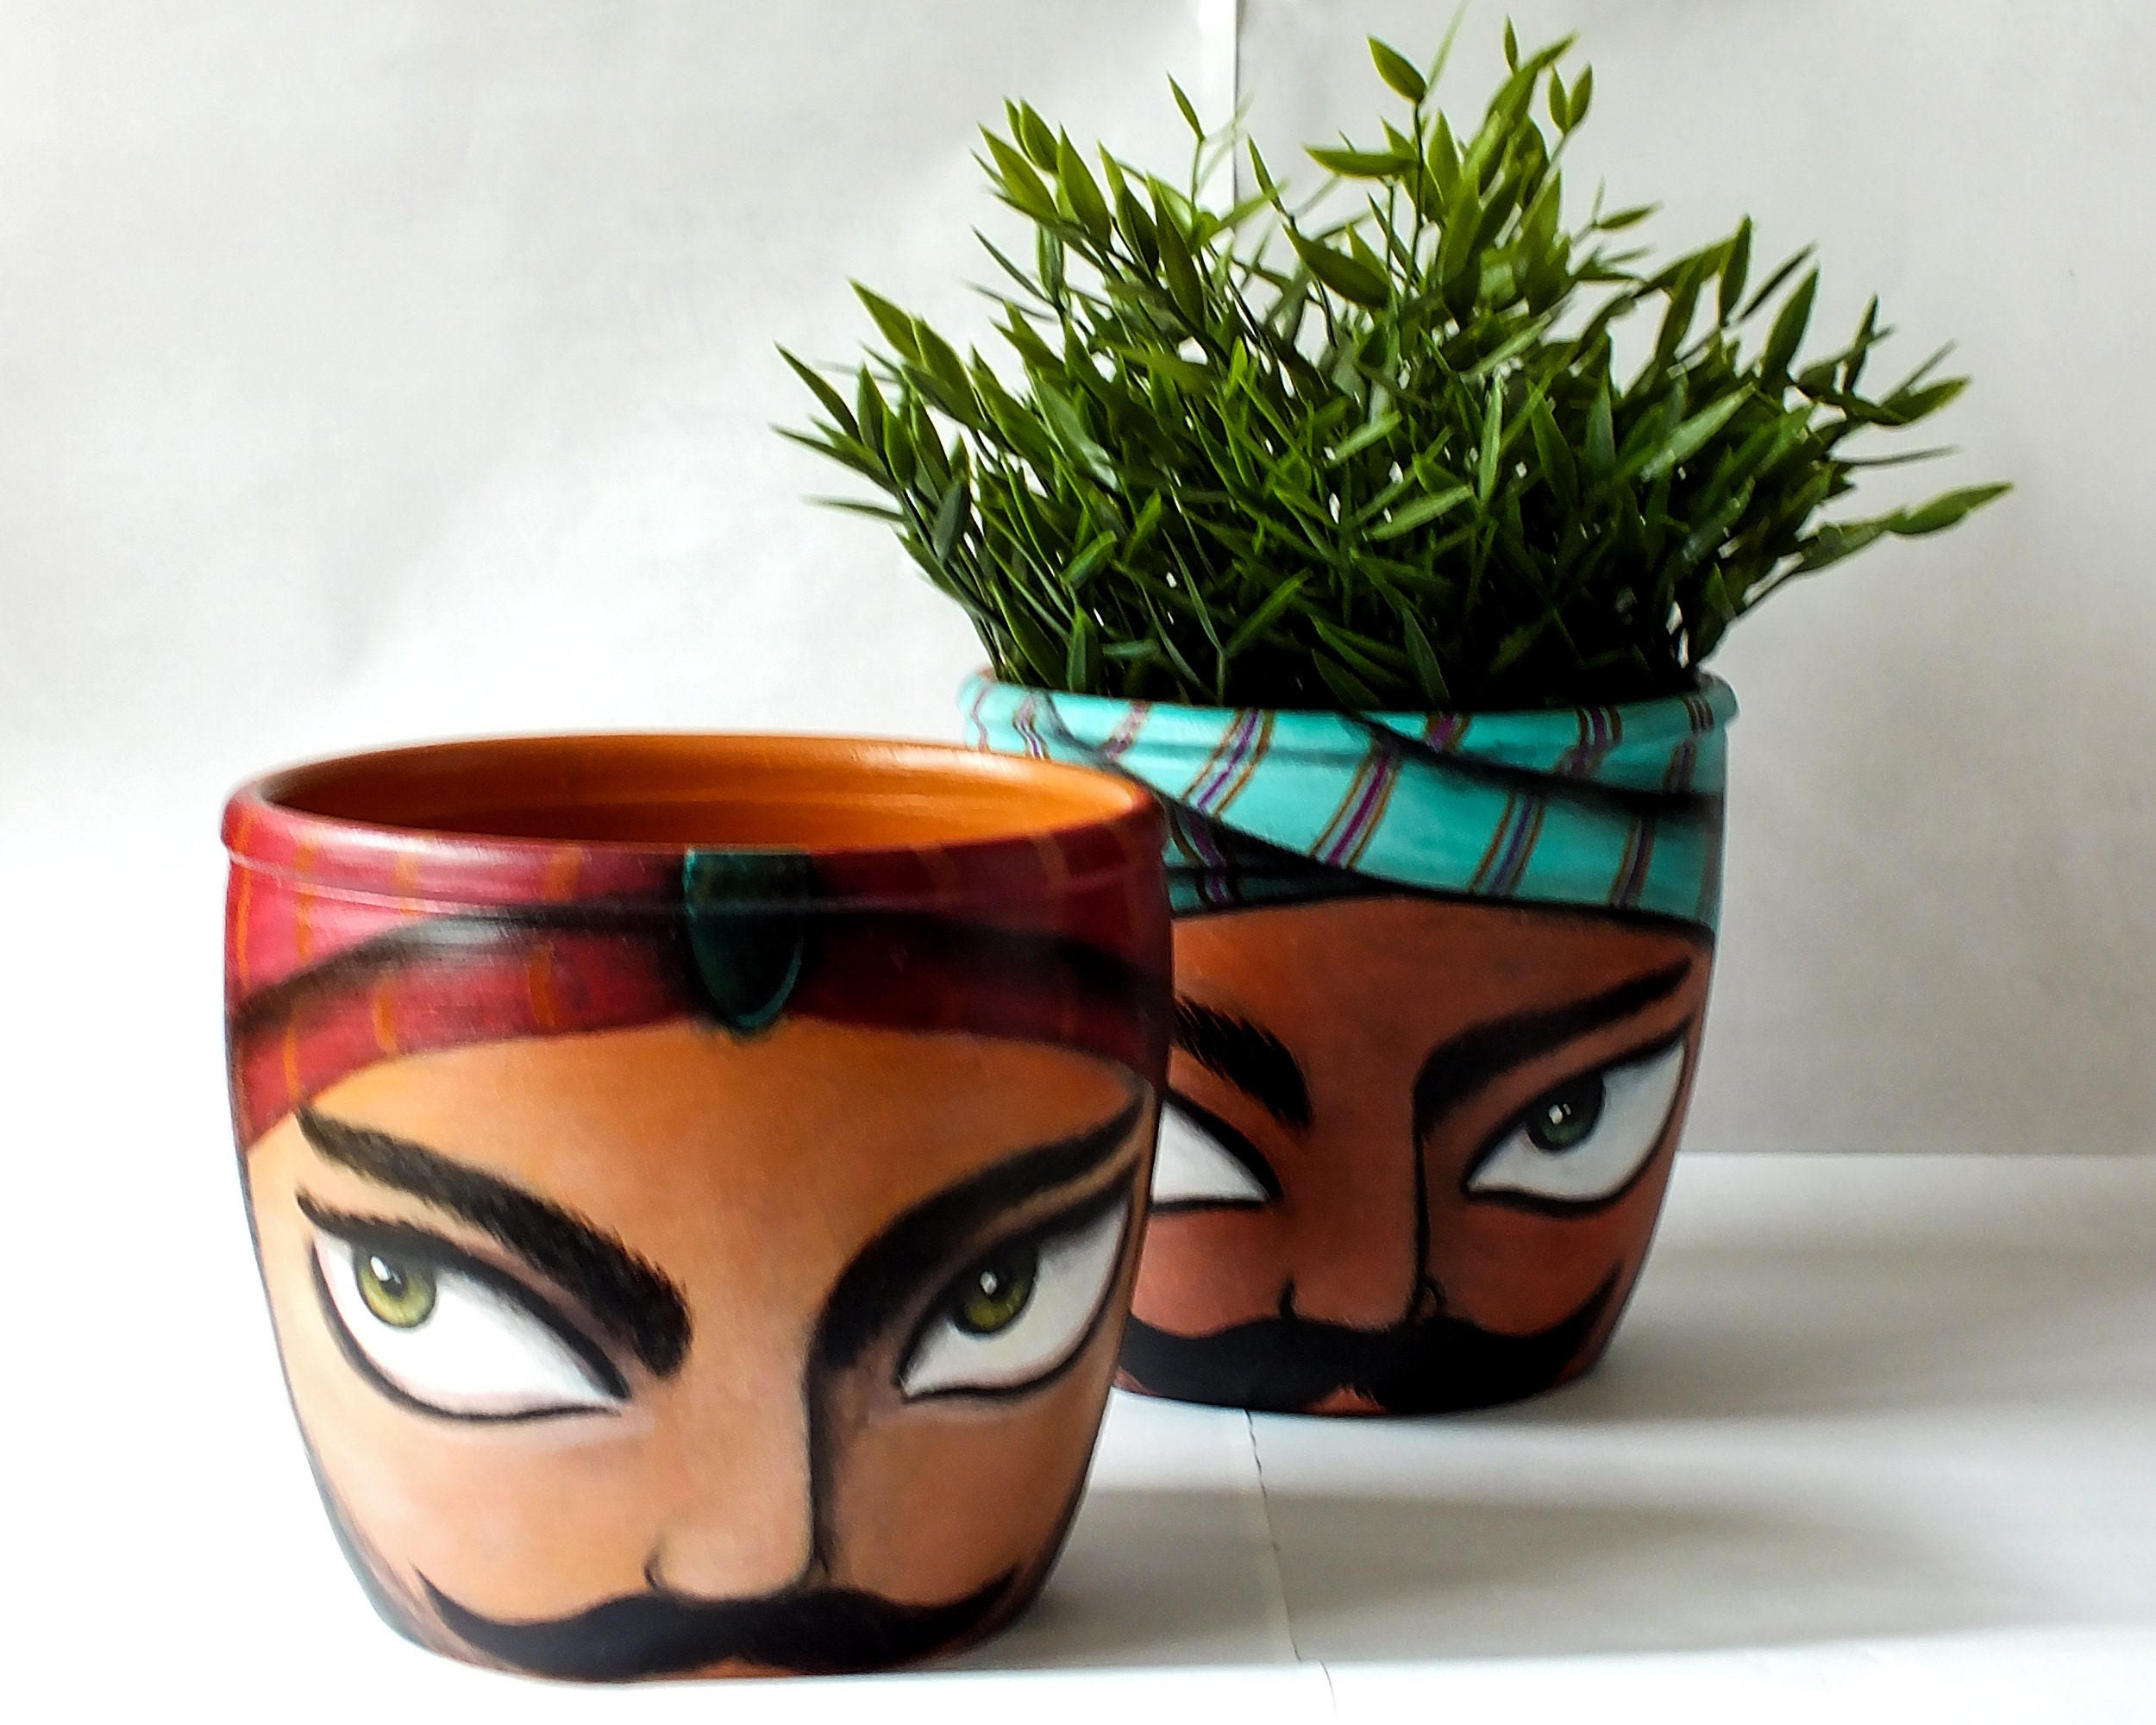 Set of 3 Ceramic Pots Hand Painted green Style 19cm. 7.5in. Toledo spain  Set of 3 Ceramic Planter Pot Plants 